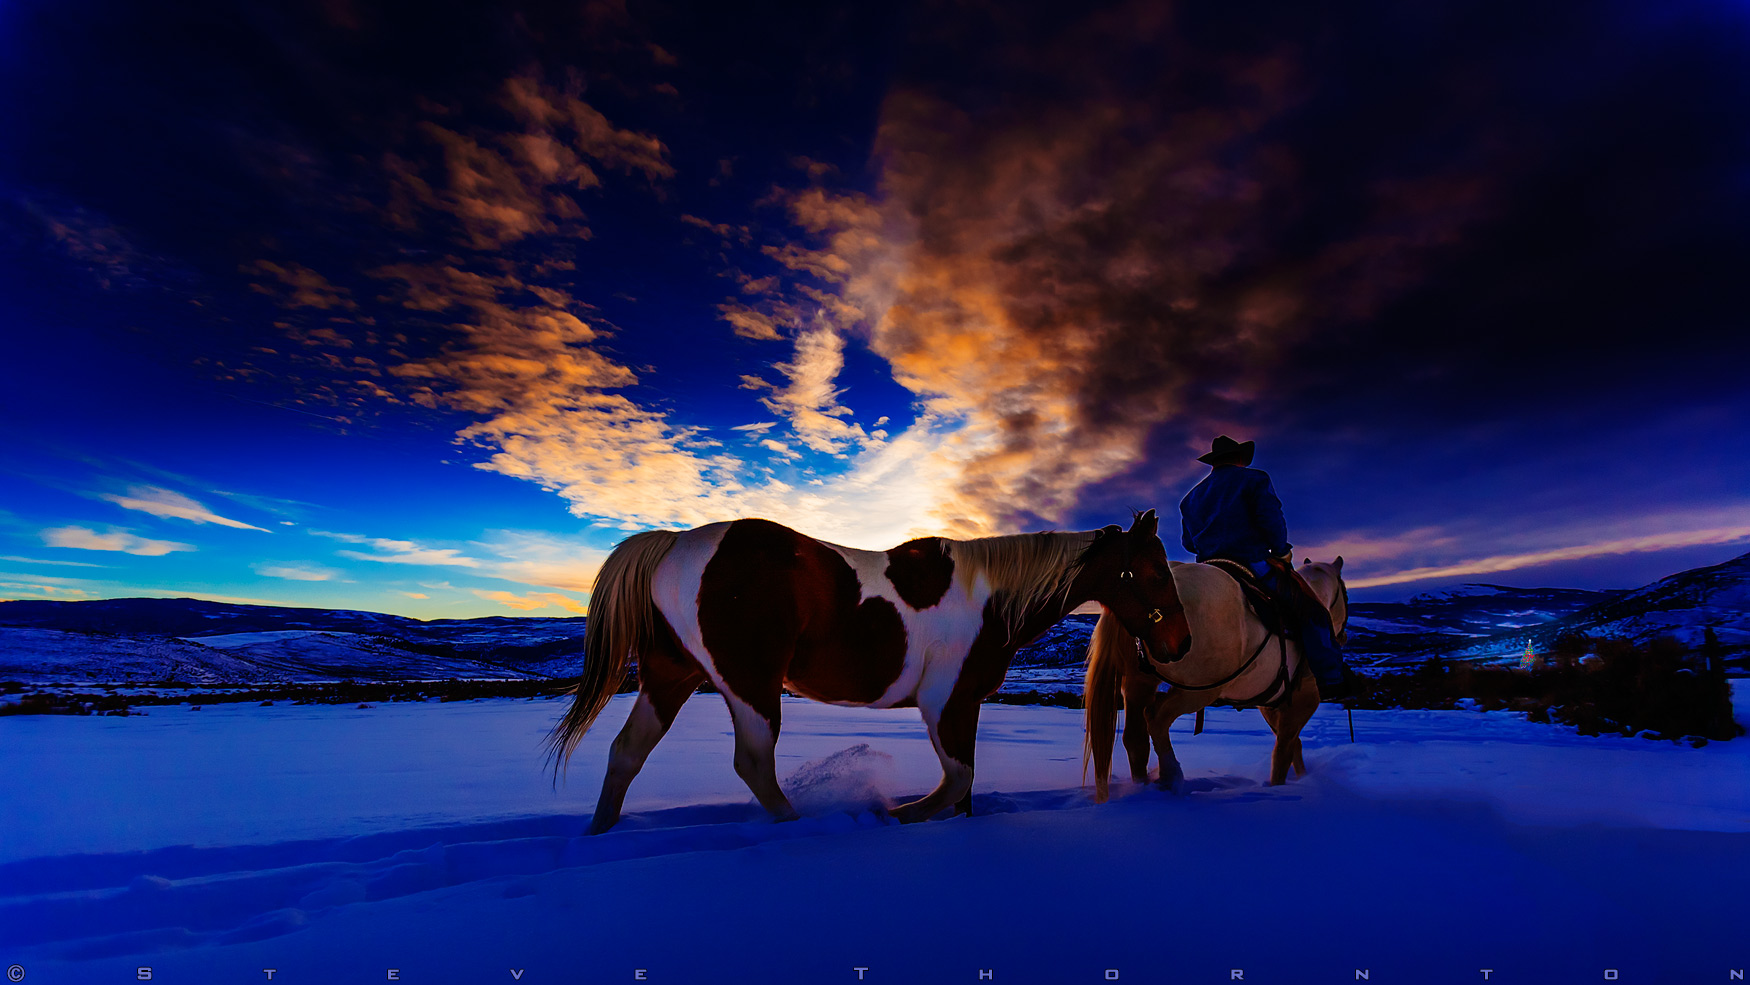 This cowboy image was shot in Colorado on a cold day just after sunset. The cowboy (Tom Calvin) is heading towards the brightly lit tree in the distance. We both rode out to the location to get clean & untracked snow. There were 2 small animal tracks that I removed in Photoshop.